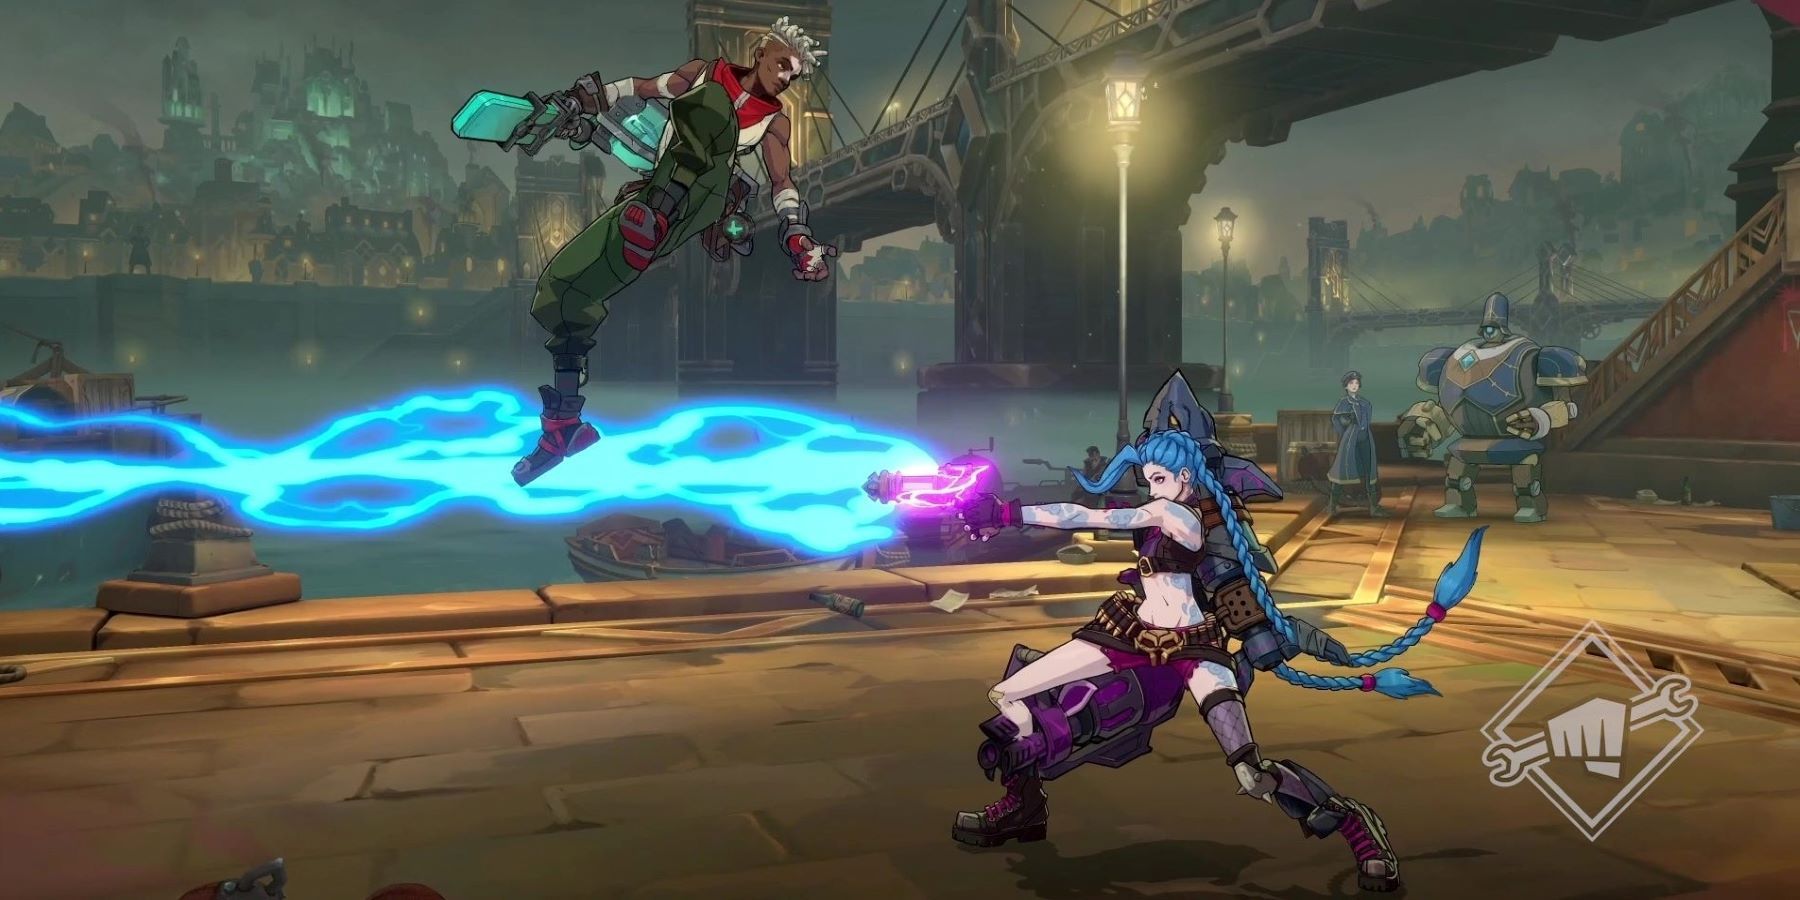 Ekko jumping over a blast from Jinx's zapper on a Piltover stage in Riot Games' Project L